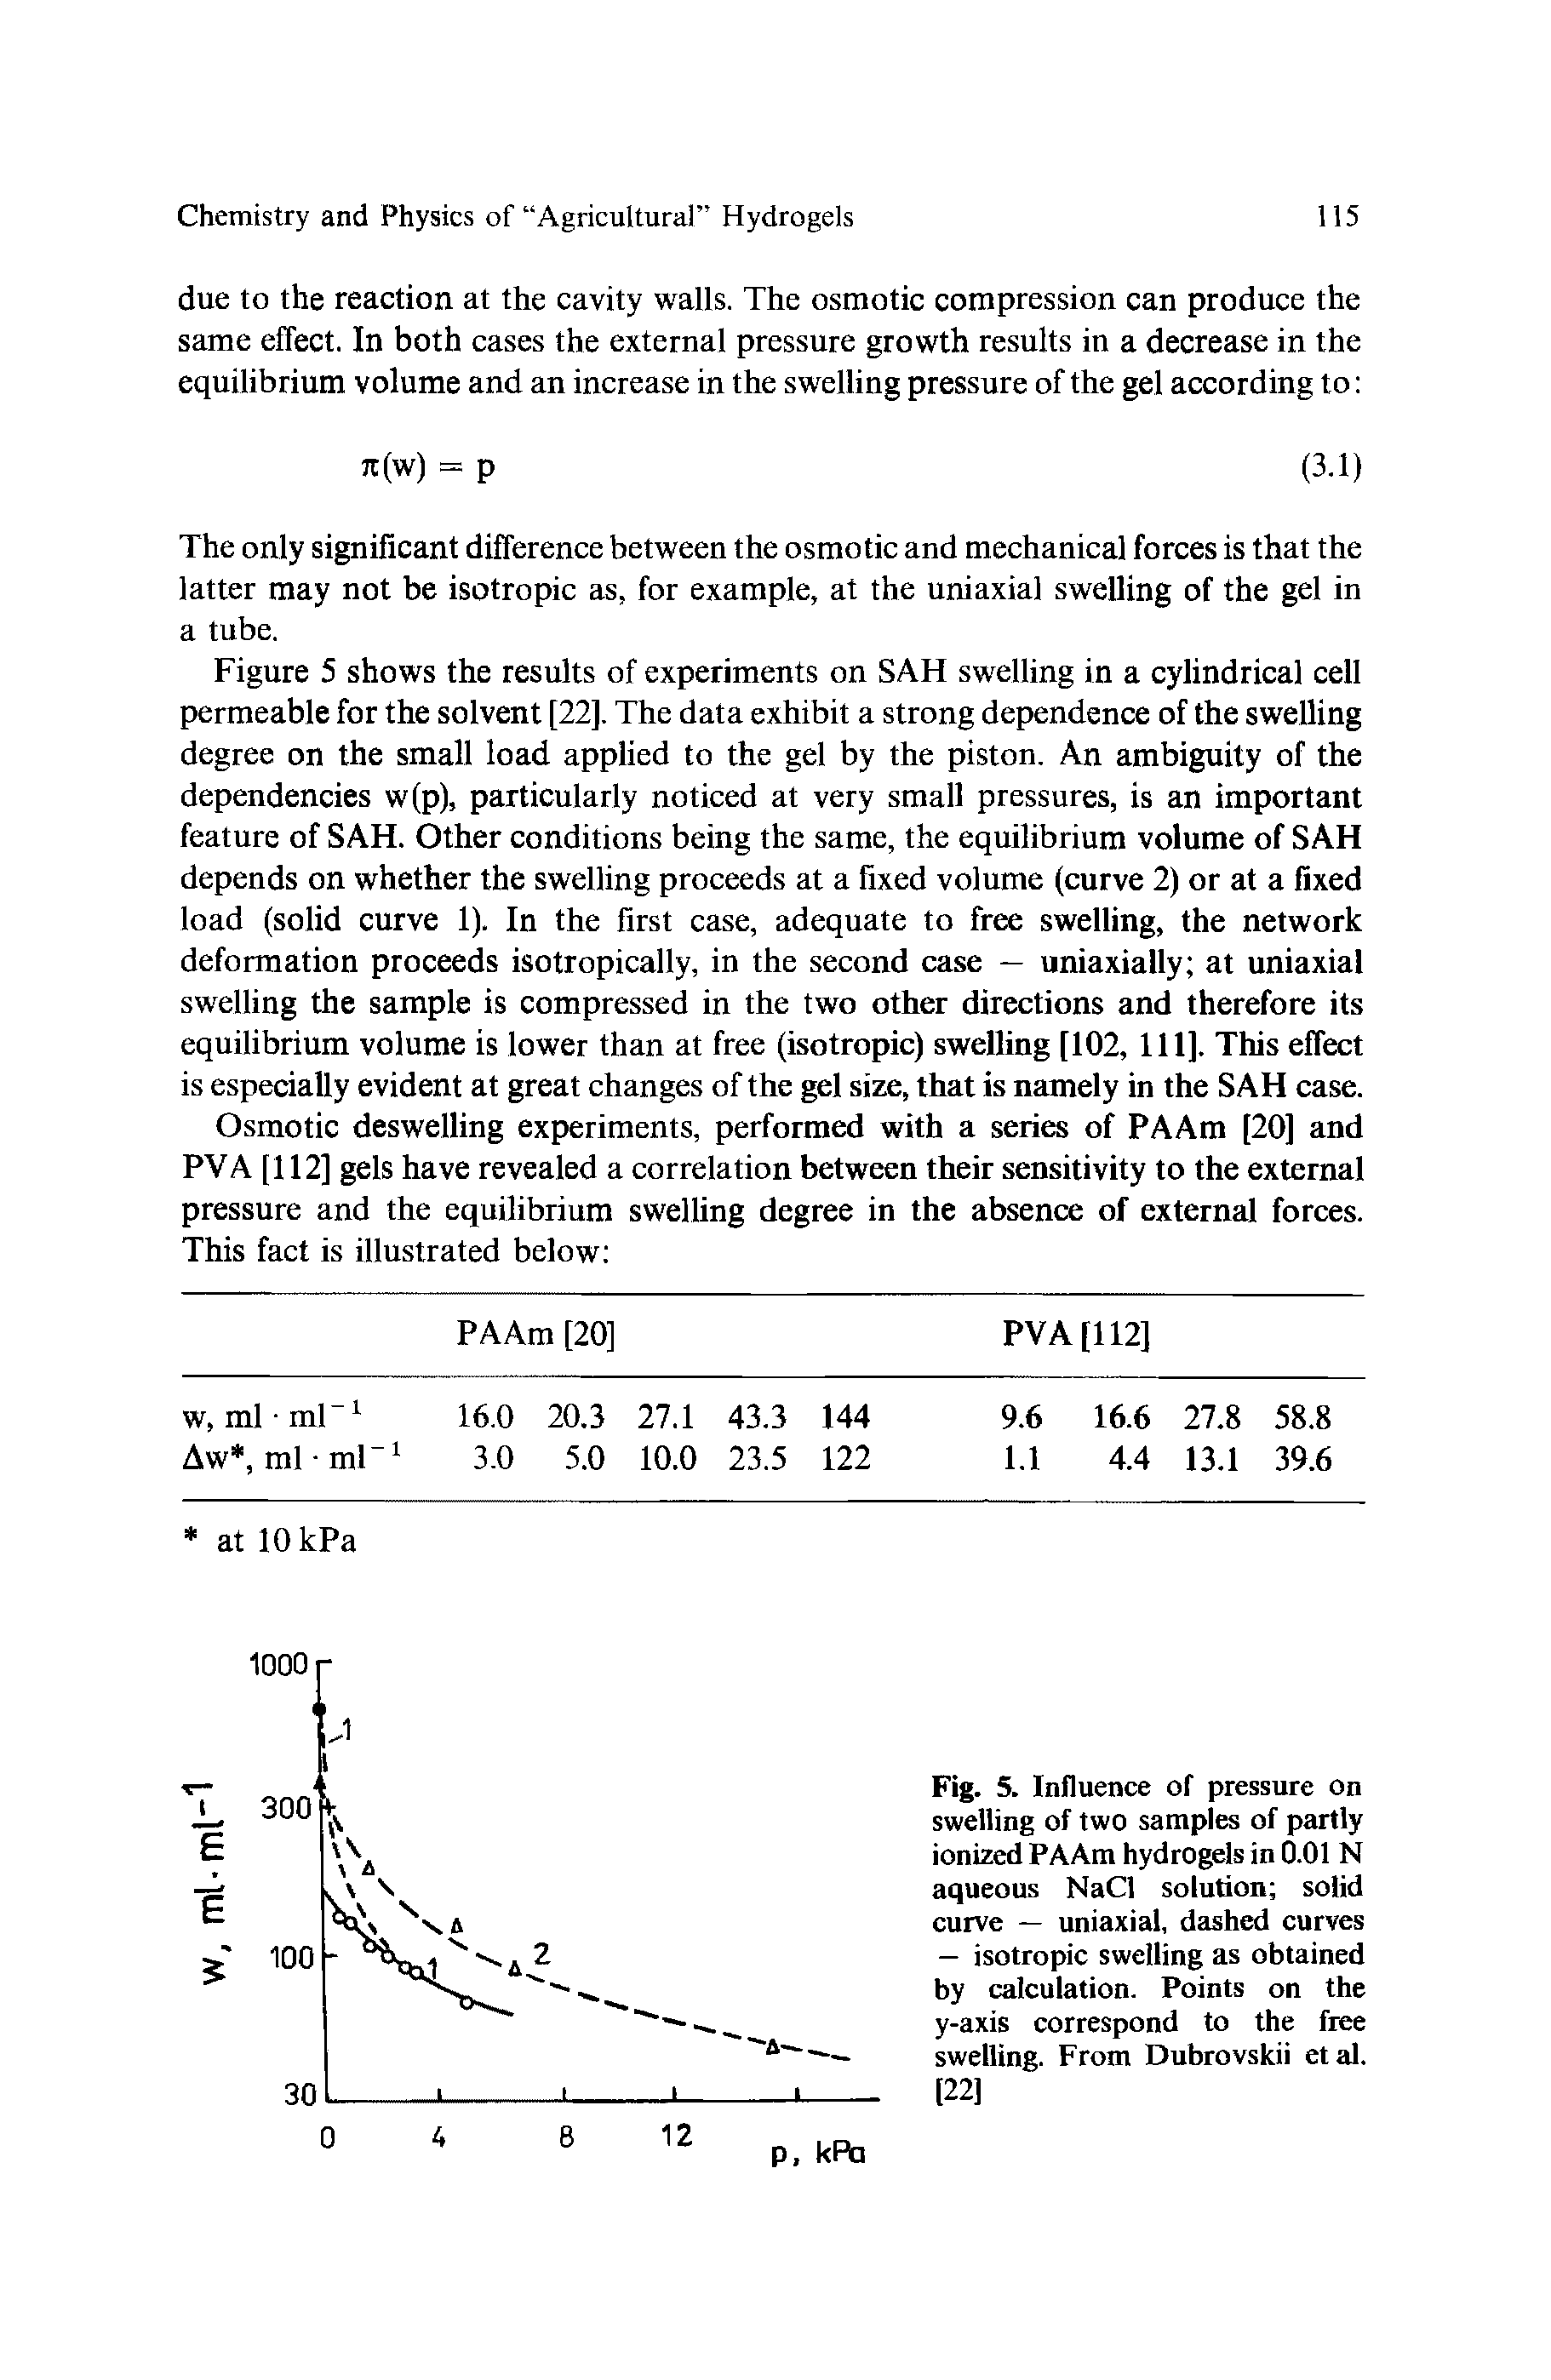 Fig. 5. Influence of pressure on swelling of two samples of partly ionized PAAm hydrogels in 0.01 N aqueous NaCl solution solid curve — uniaxial, dashed curves — isotropic swelling as obtained by calculation. Points on the y-axis correspond to the free swelling. From Dubrovskii etal. [22]...